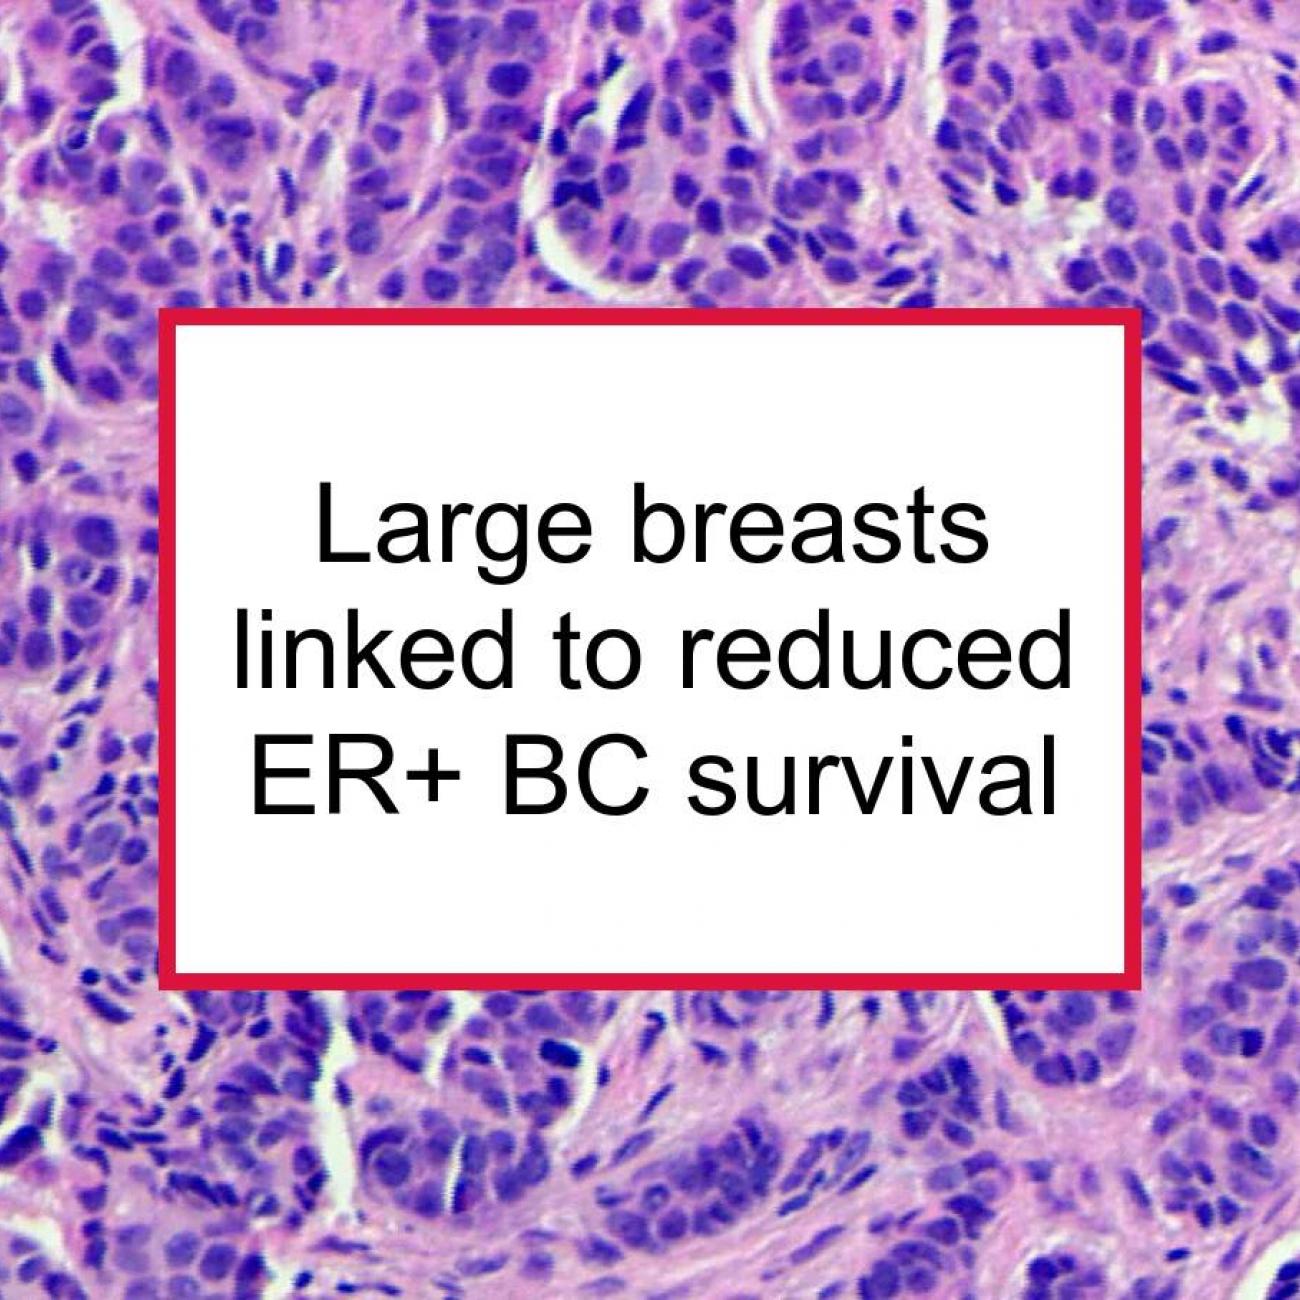 Bmi for large breasts Large Breast Size Linked To Reduced Survival For Er Breast Cancer Food For Breast Cancer